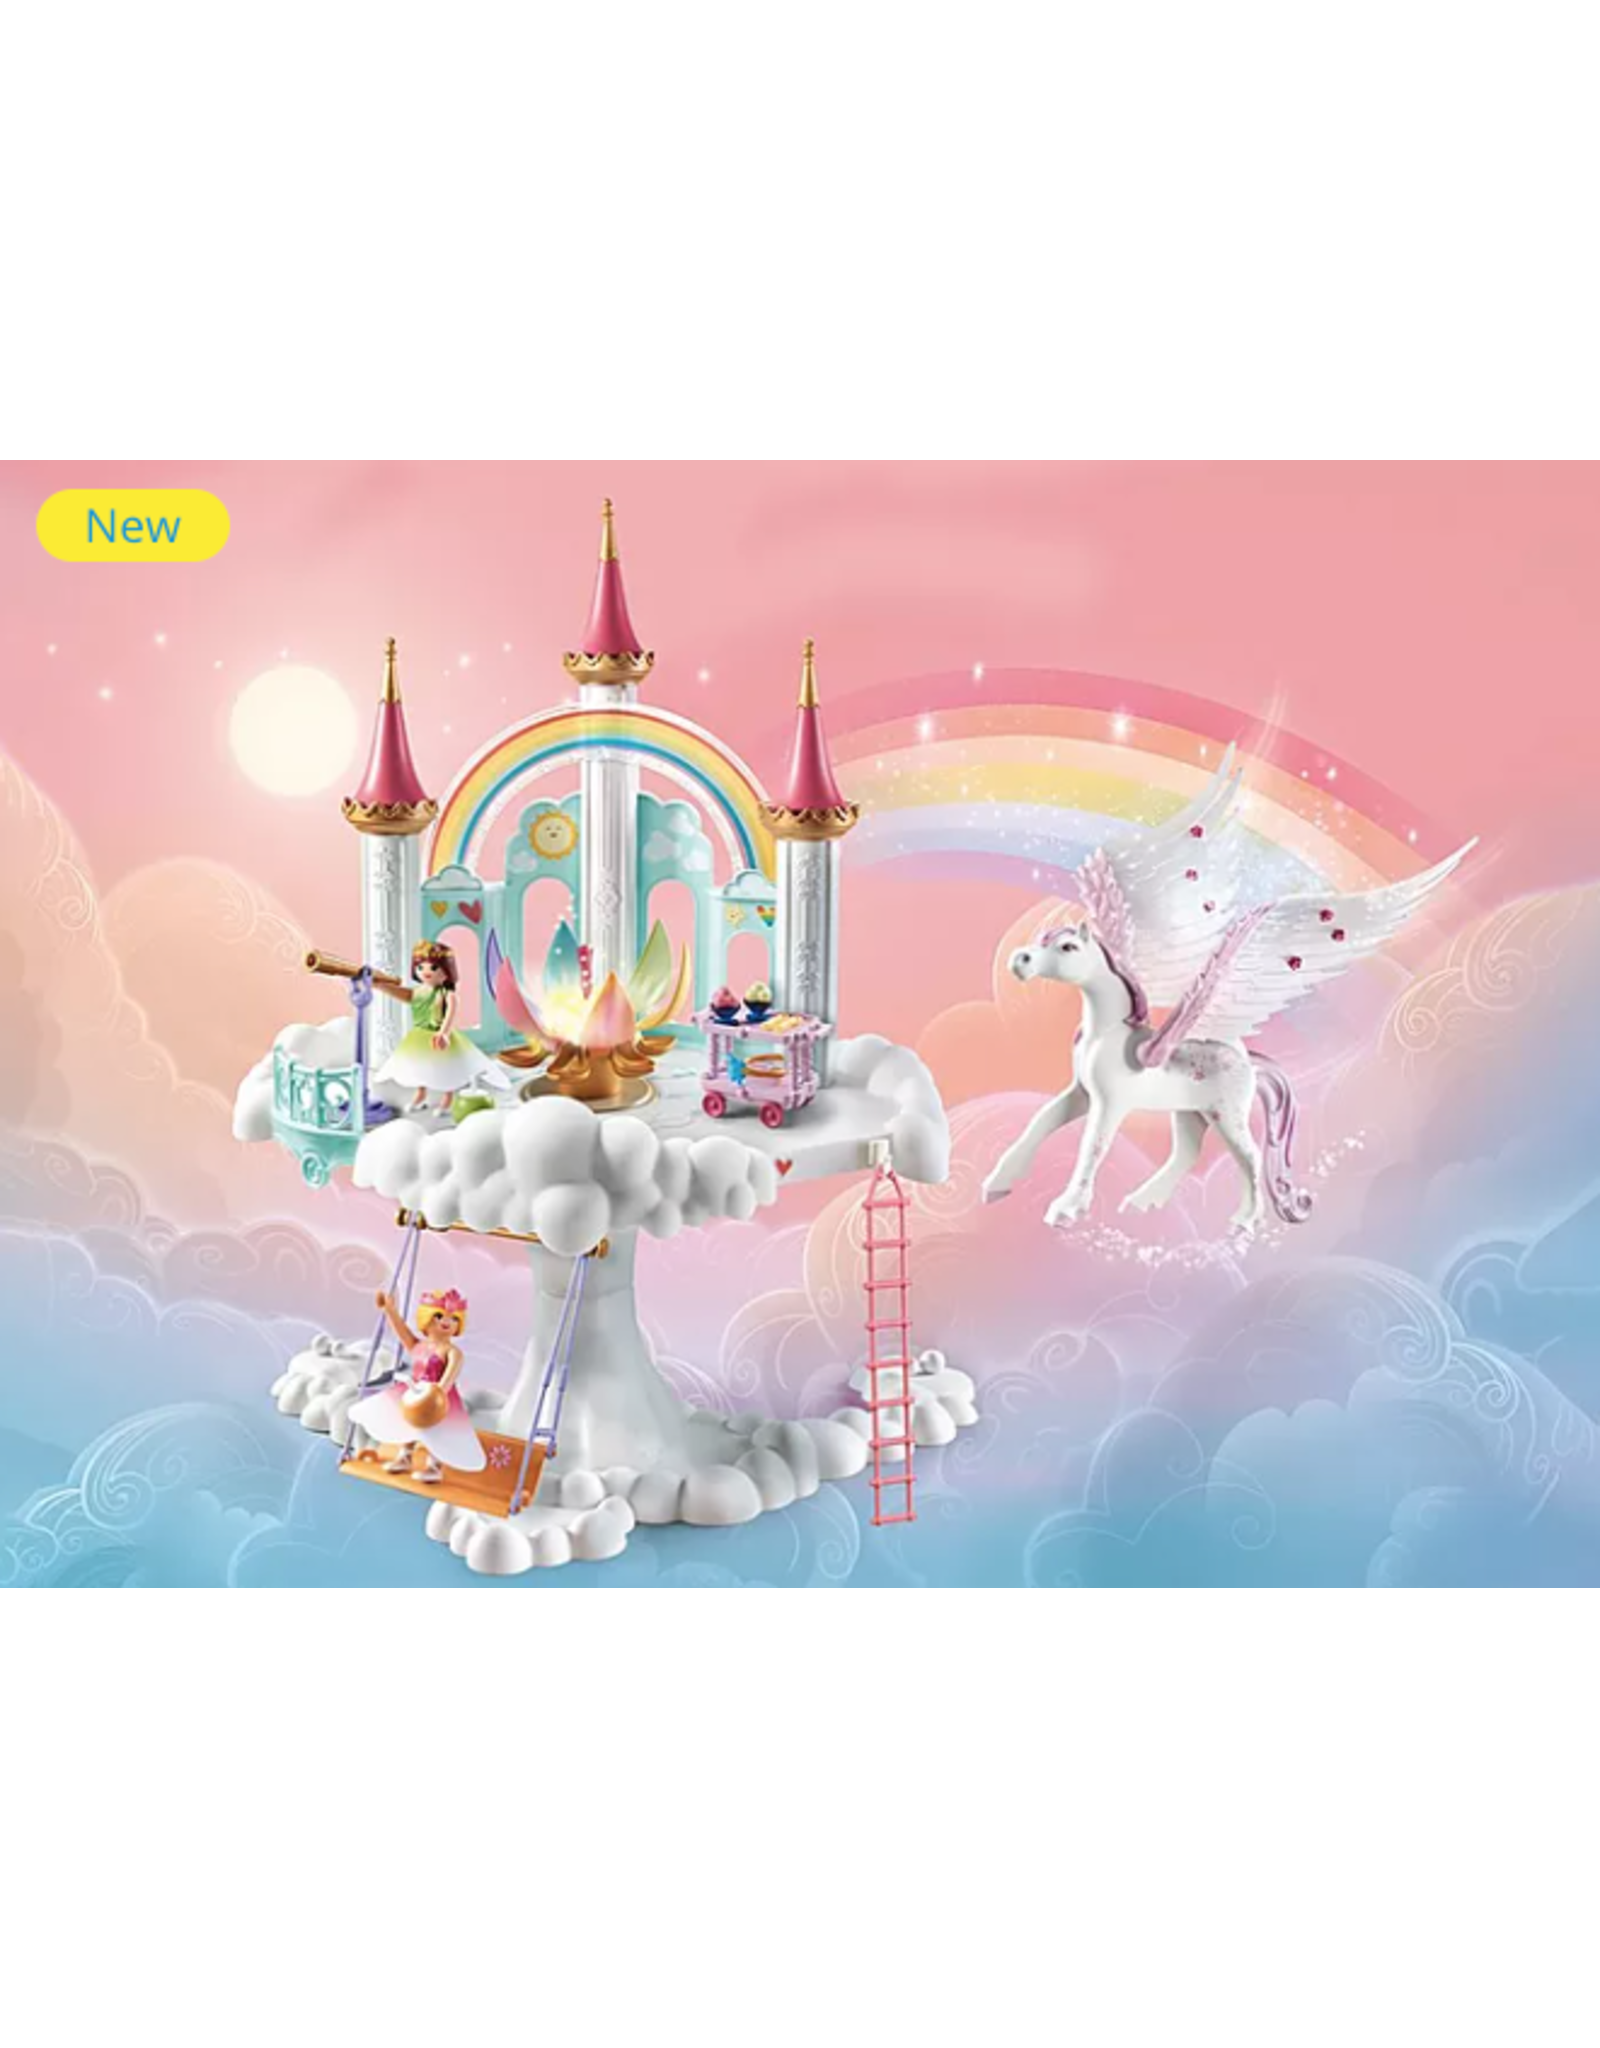 Playmobil Rainbow Castle in the Clouds